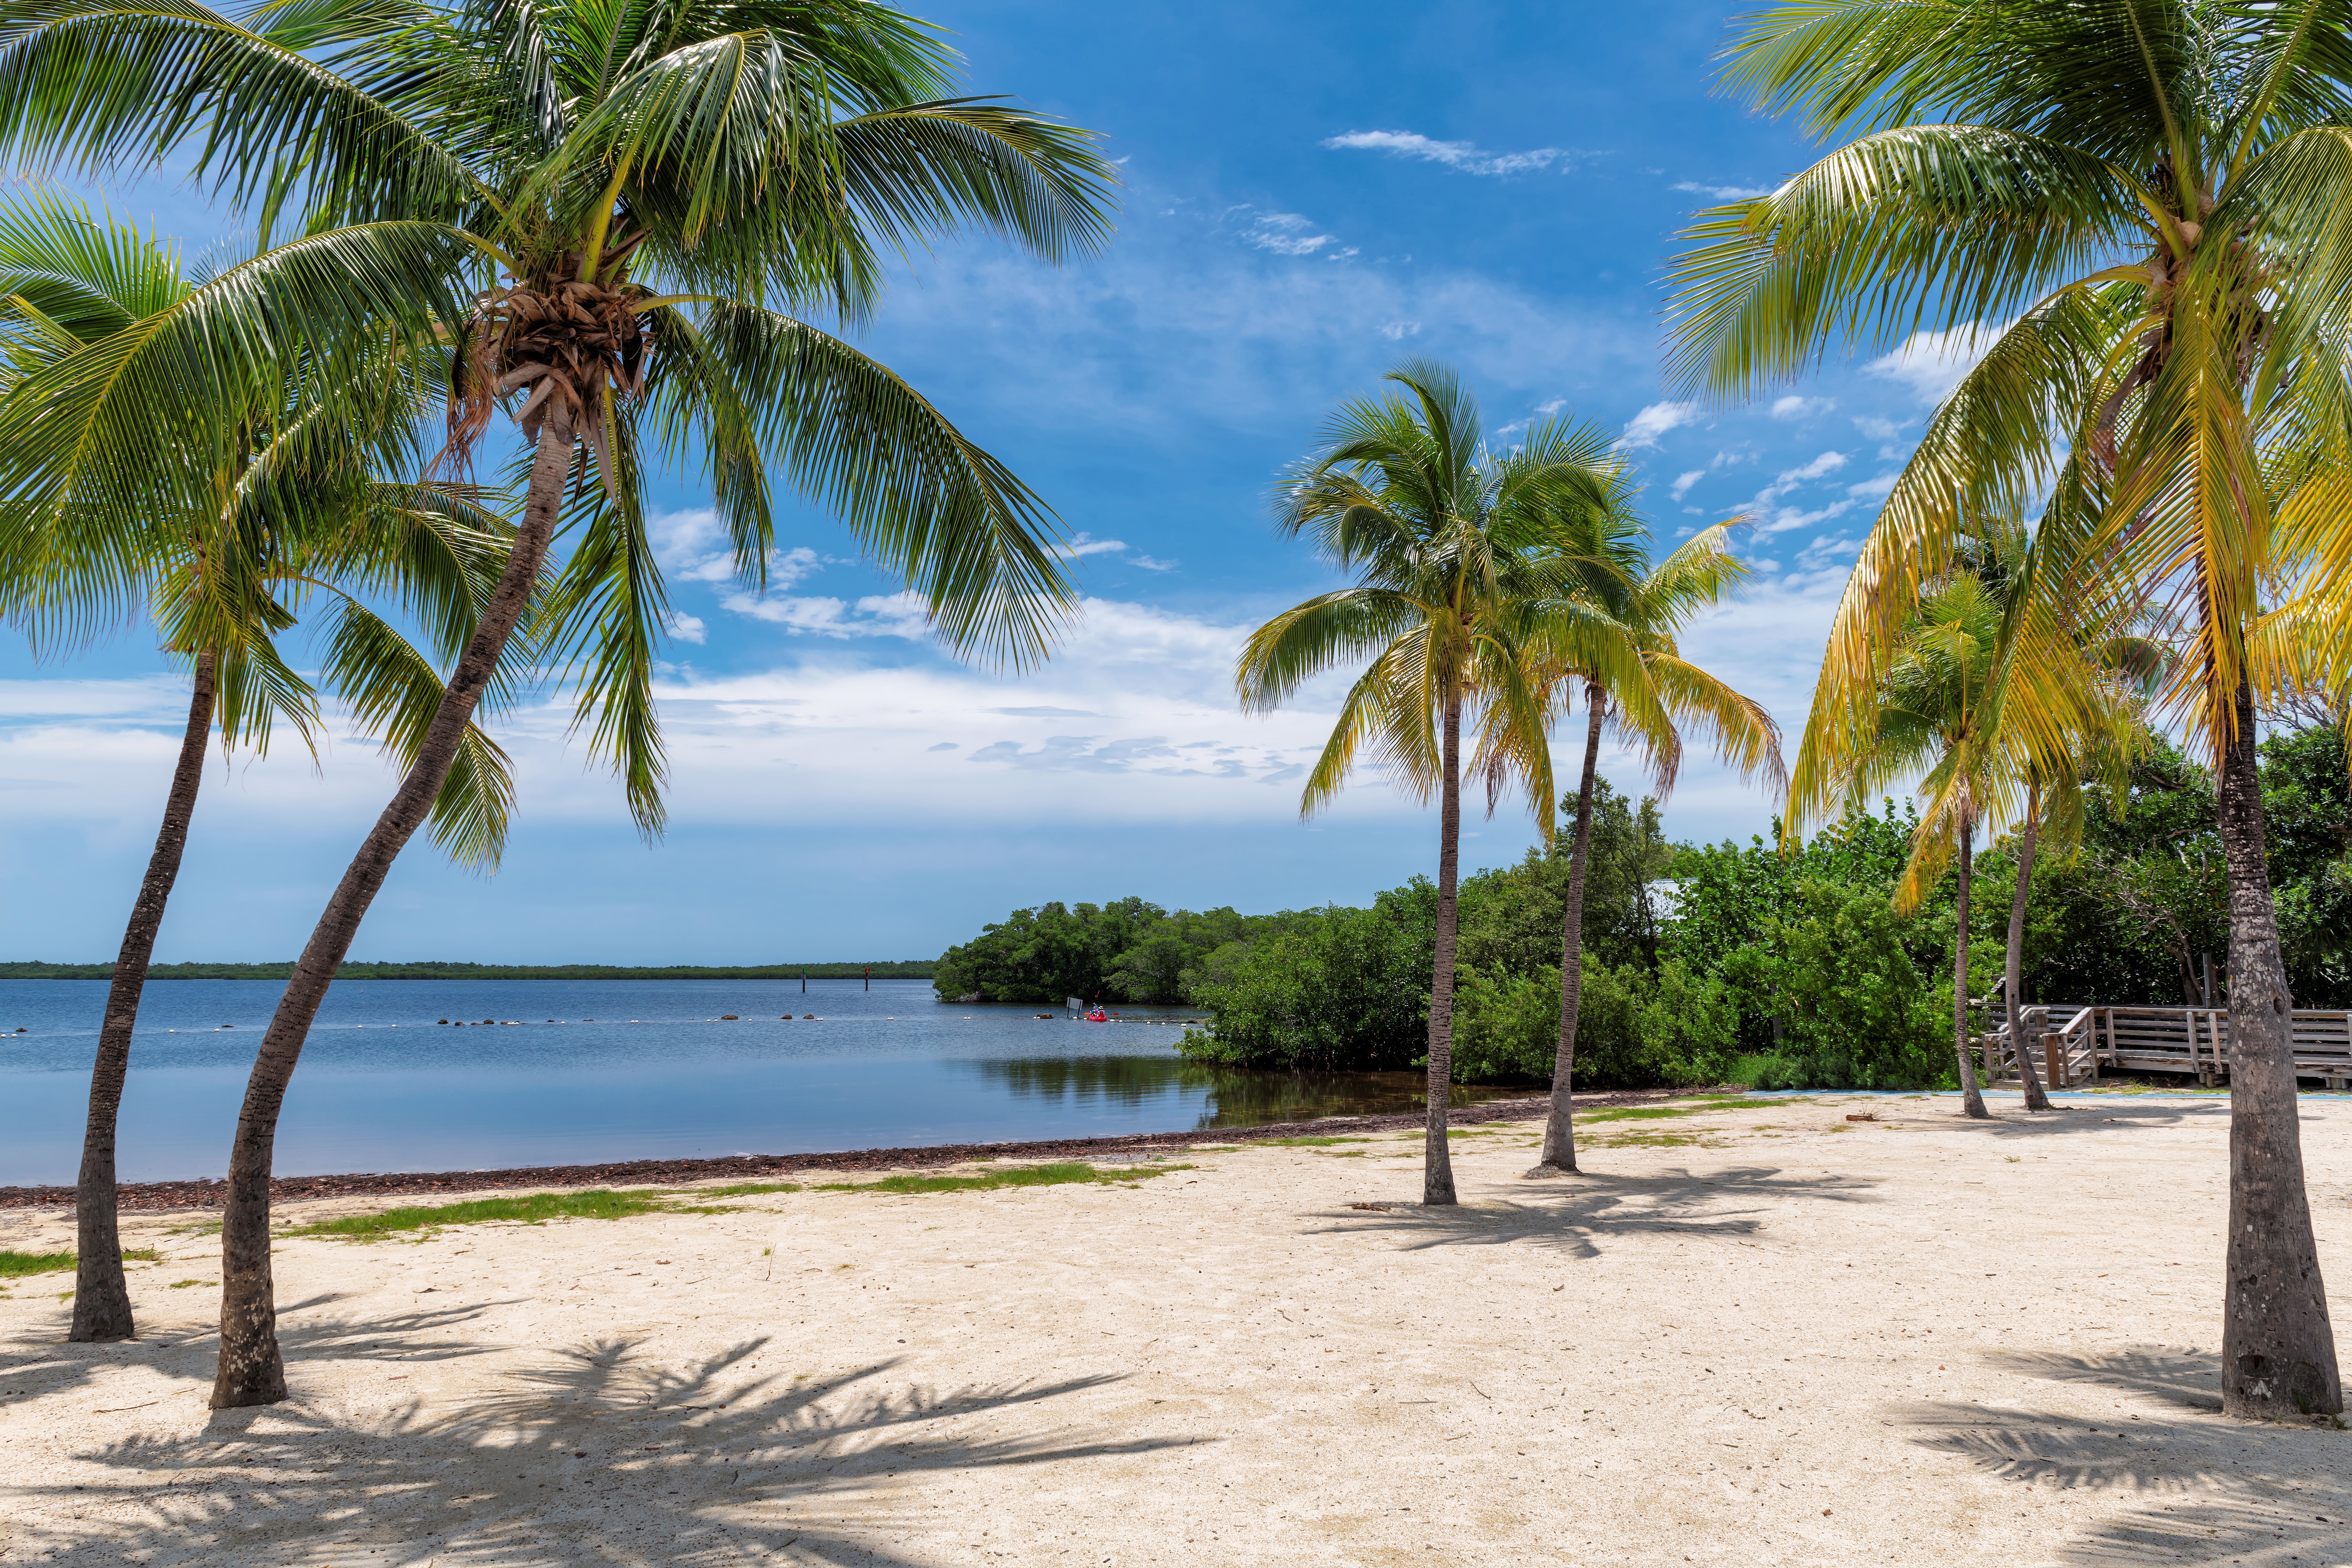 Palm trees on a quiet Key Largo beach in the Florida Keys, with bright-blue skies above 